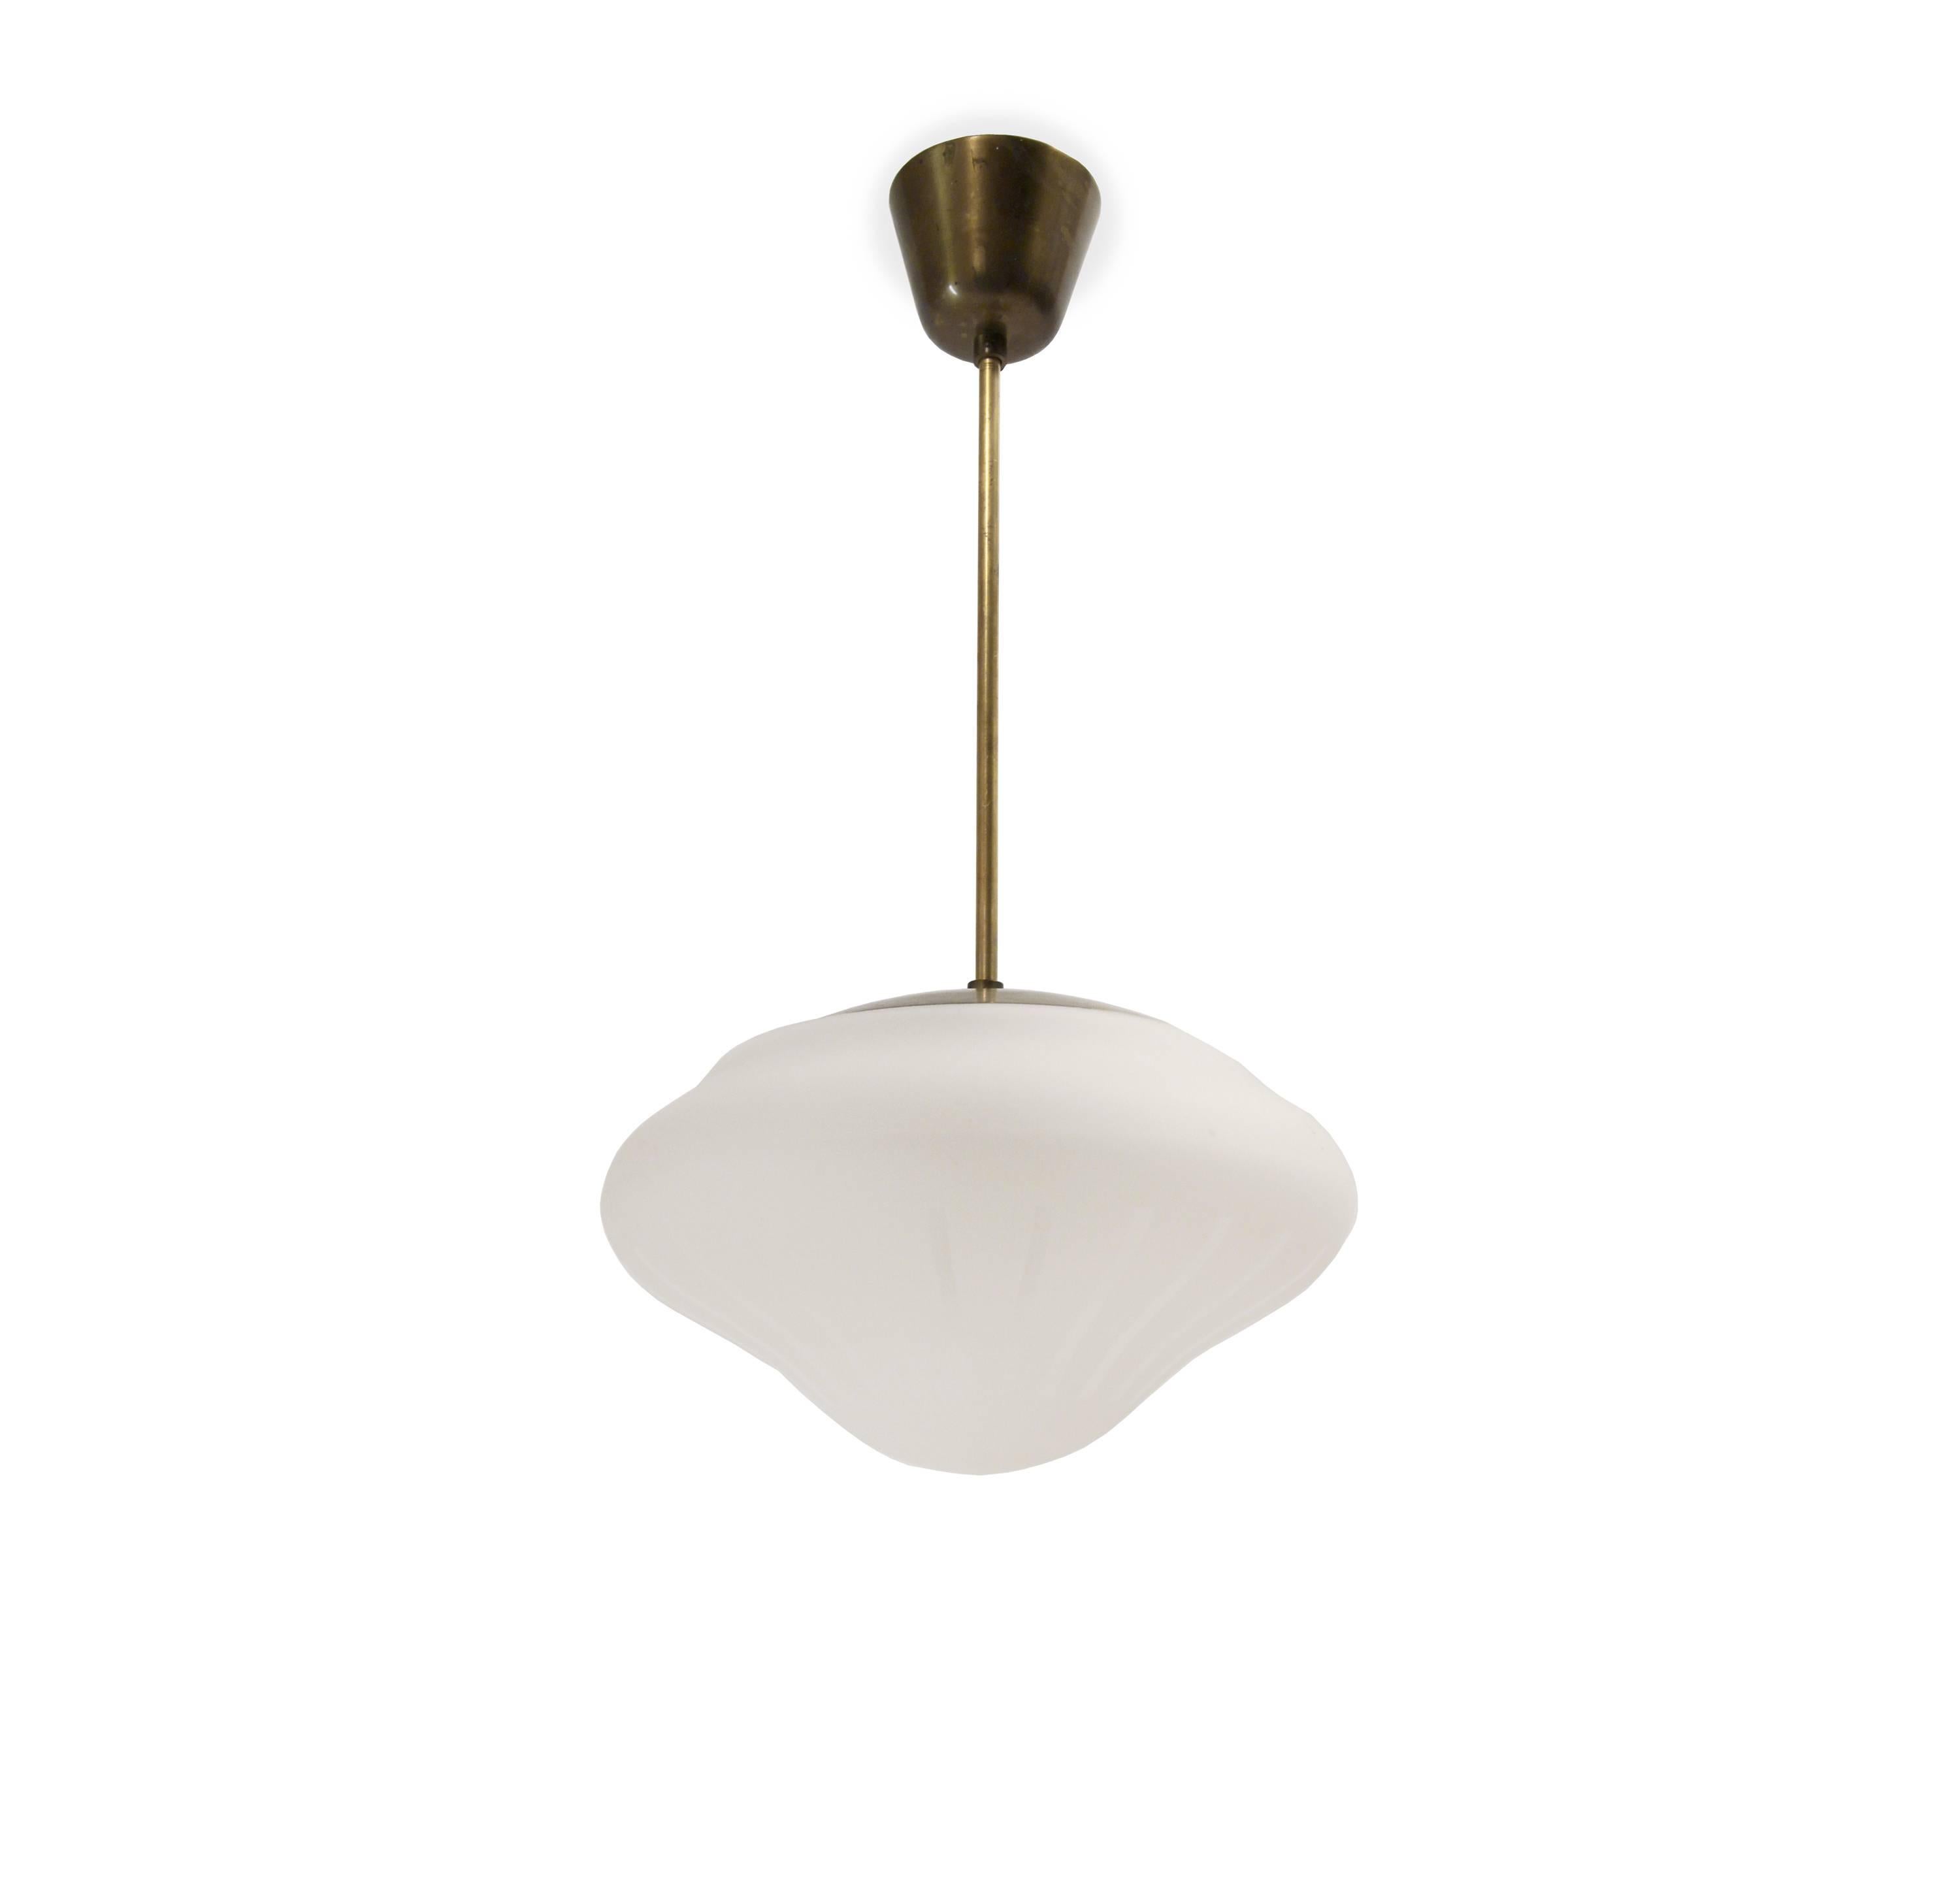 Decorative ceiling light in frosted glass and stem in brass. Designed and made in Sweden from circa 1950s first half. The lamp is fully working and in excellent vintage condition.